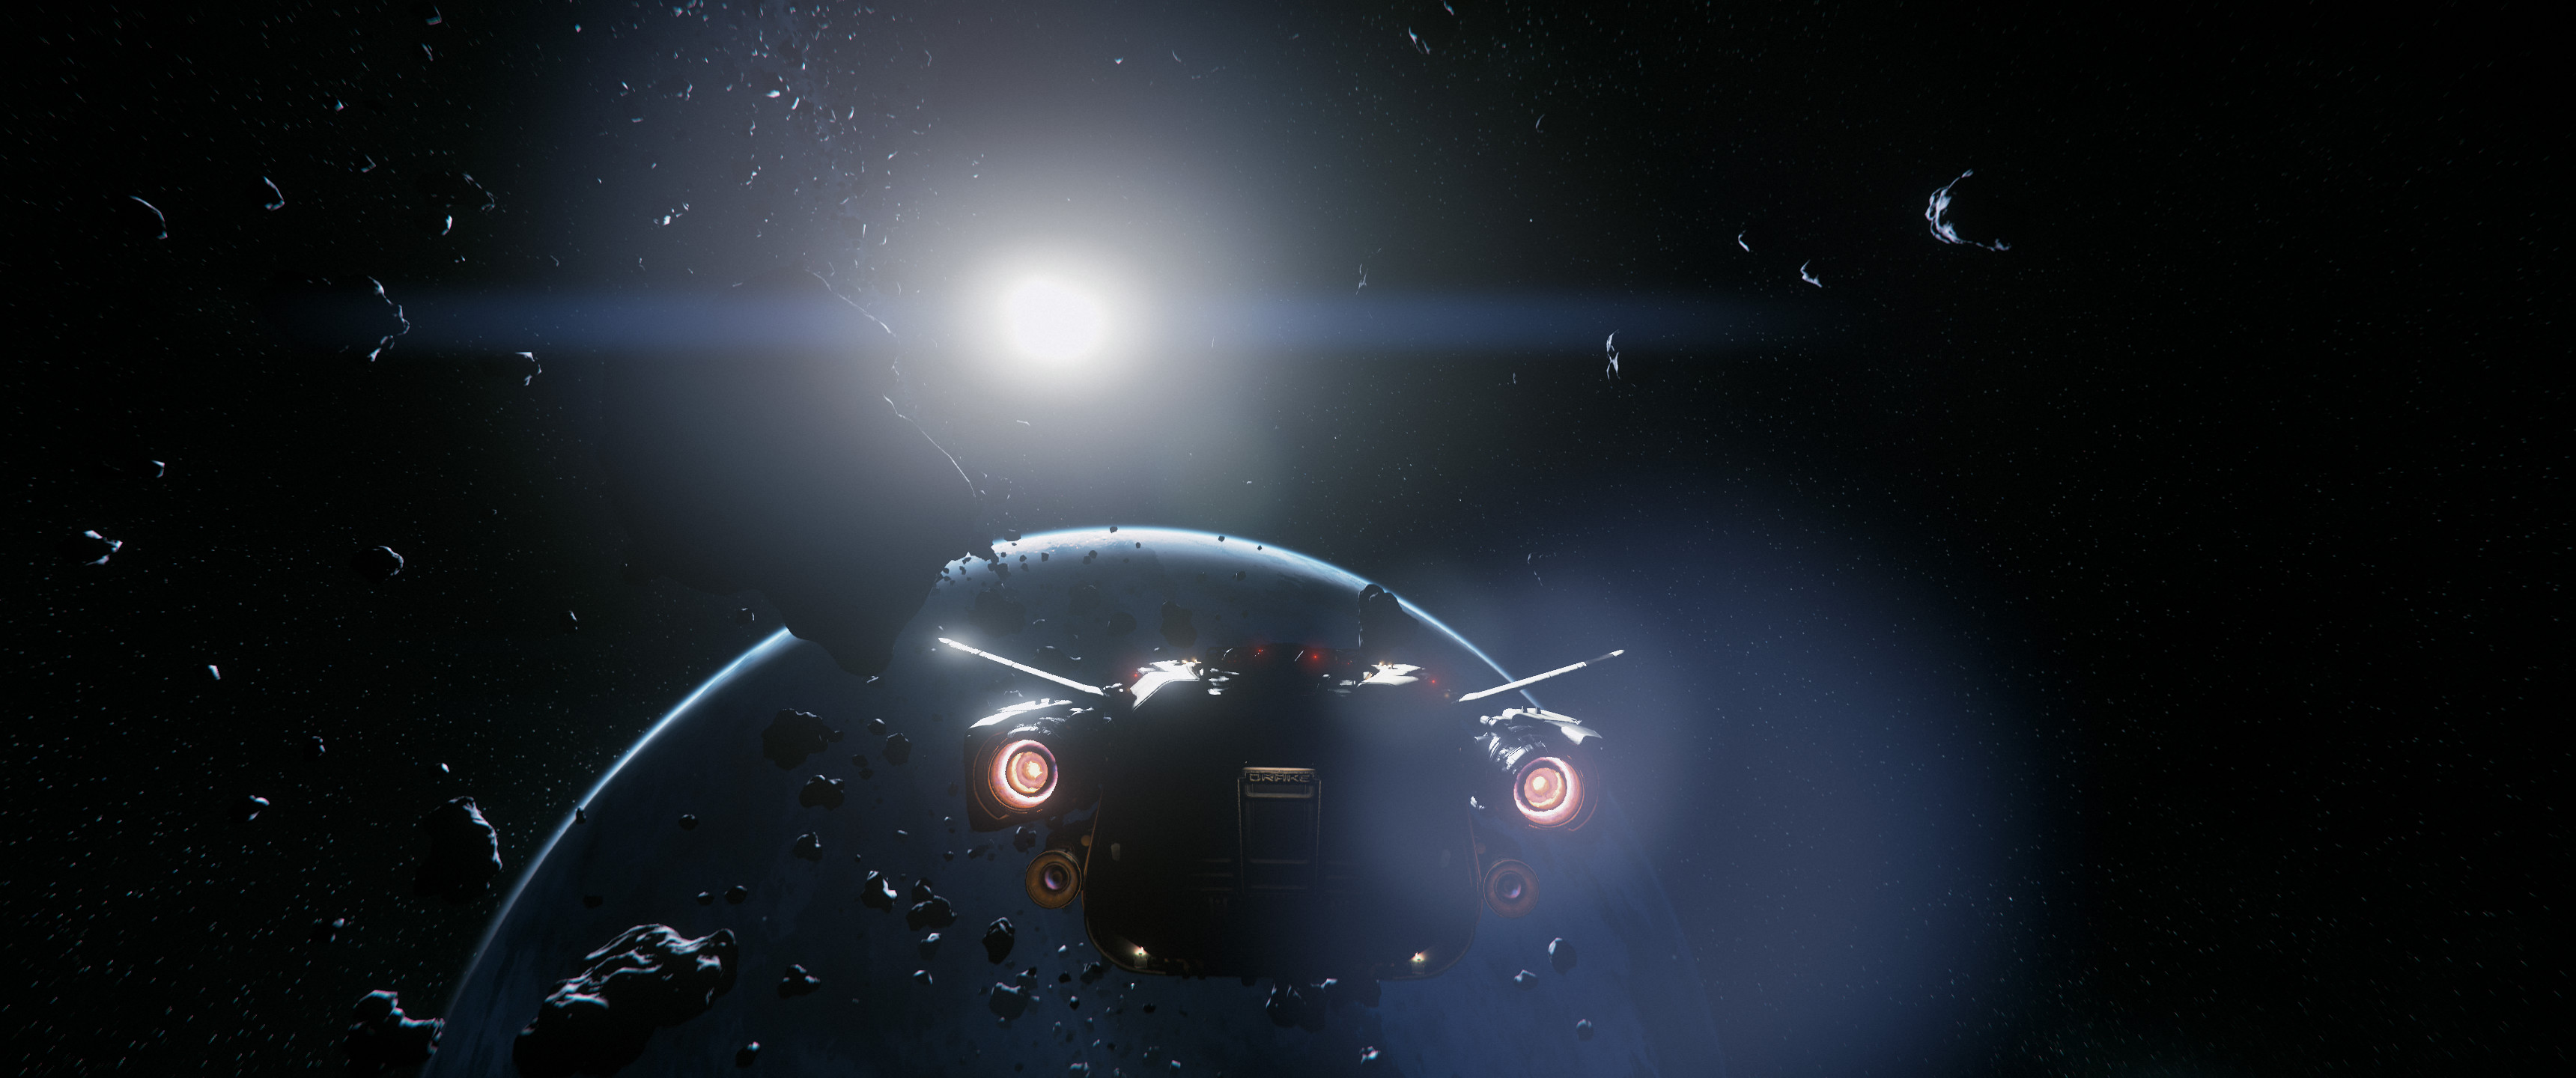 Small ship navigating an asteroid field with a planet starkly lit by a distant sun